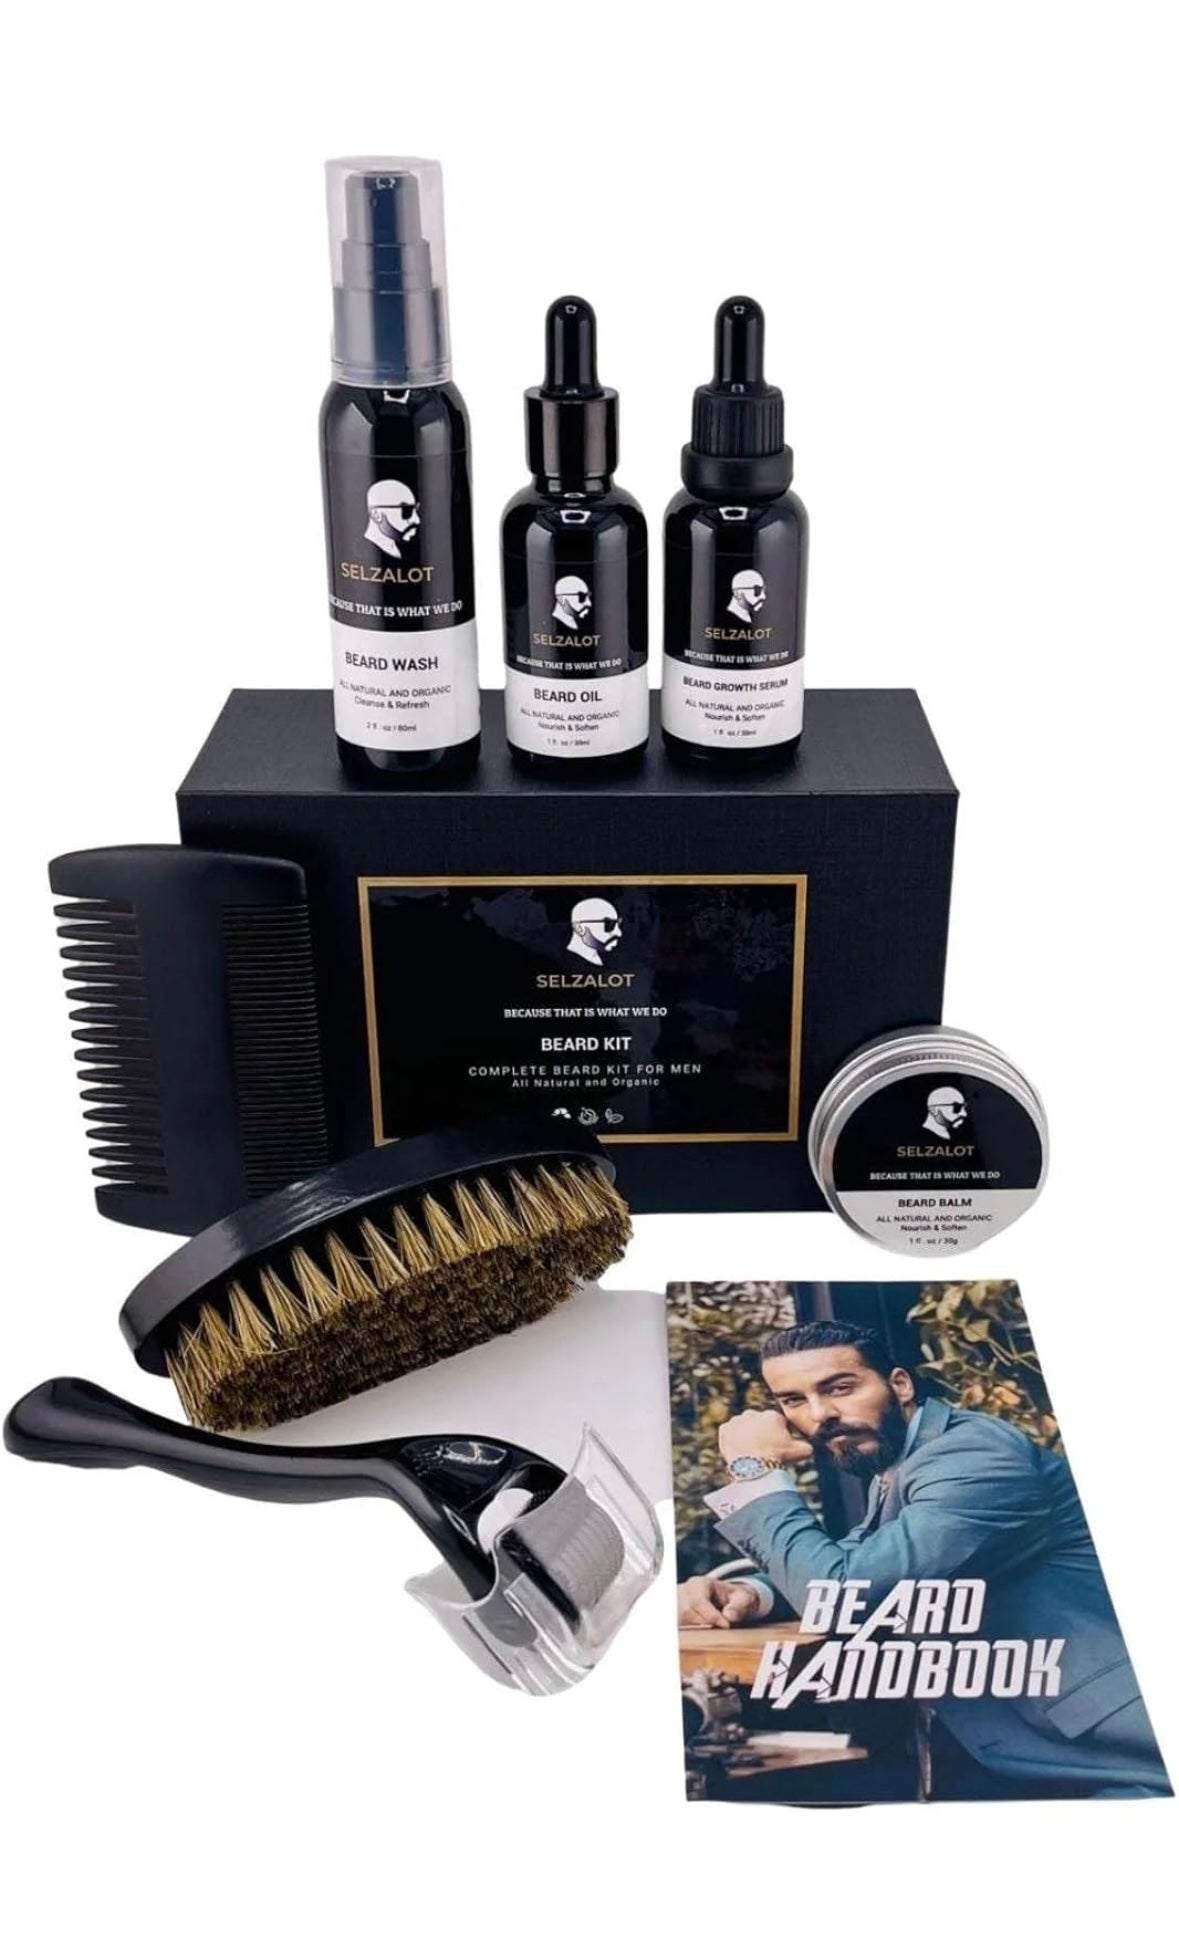 SELZALOT Beard Growth Kit Facial Hairs Men's Grooming Set 7 Pieces Beard Products with Oil, Serum, Balm, Shampoo, Comb, Brush and Hand Beard Care Kit for Men Men Self Care - Selzalot